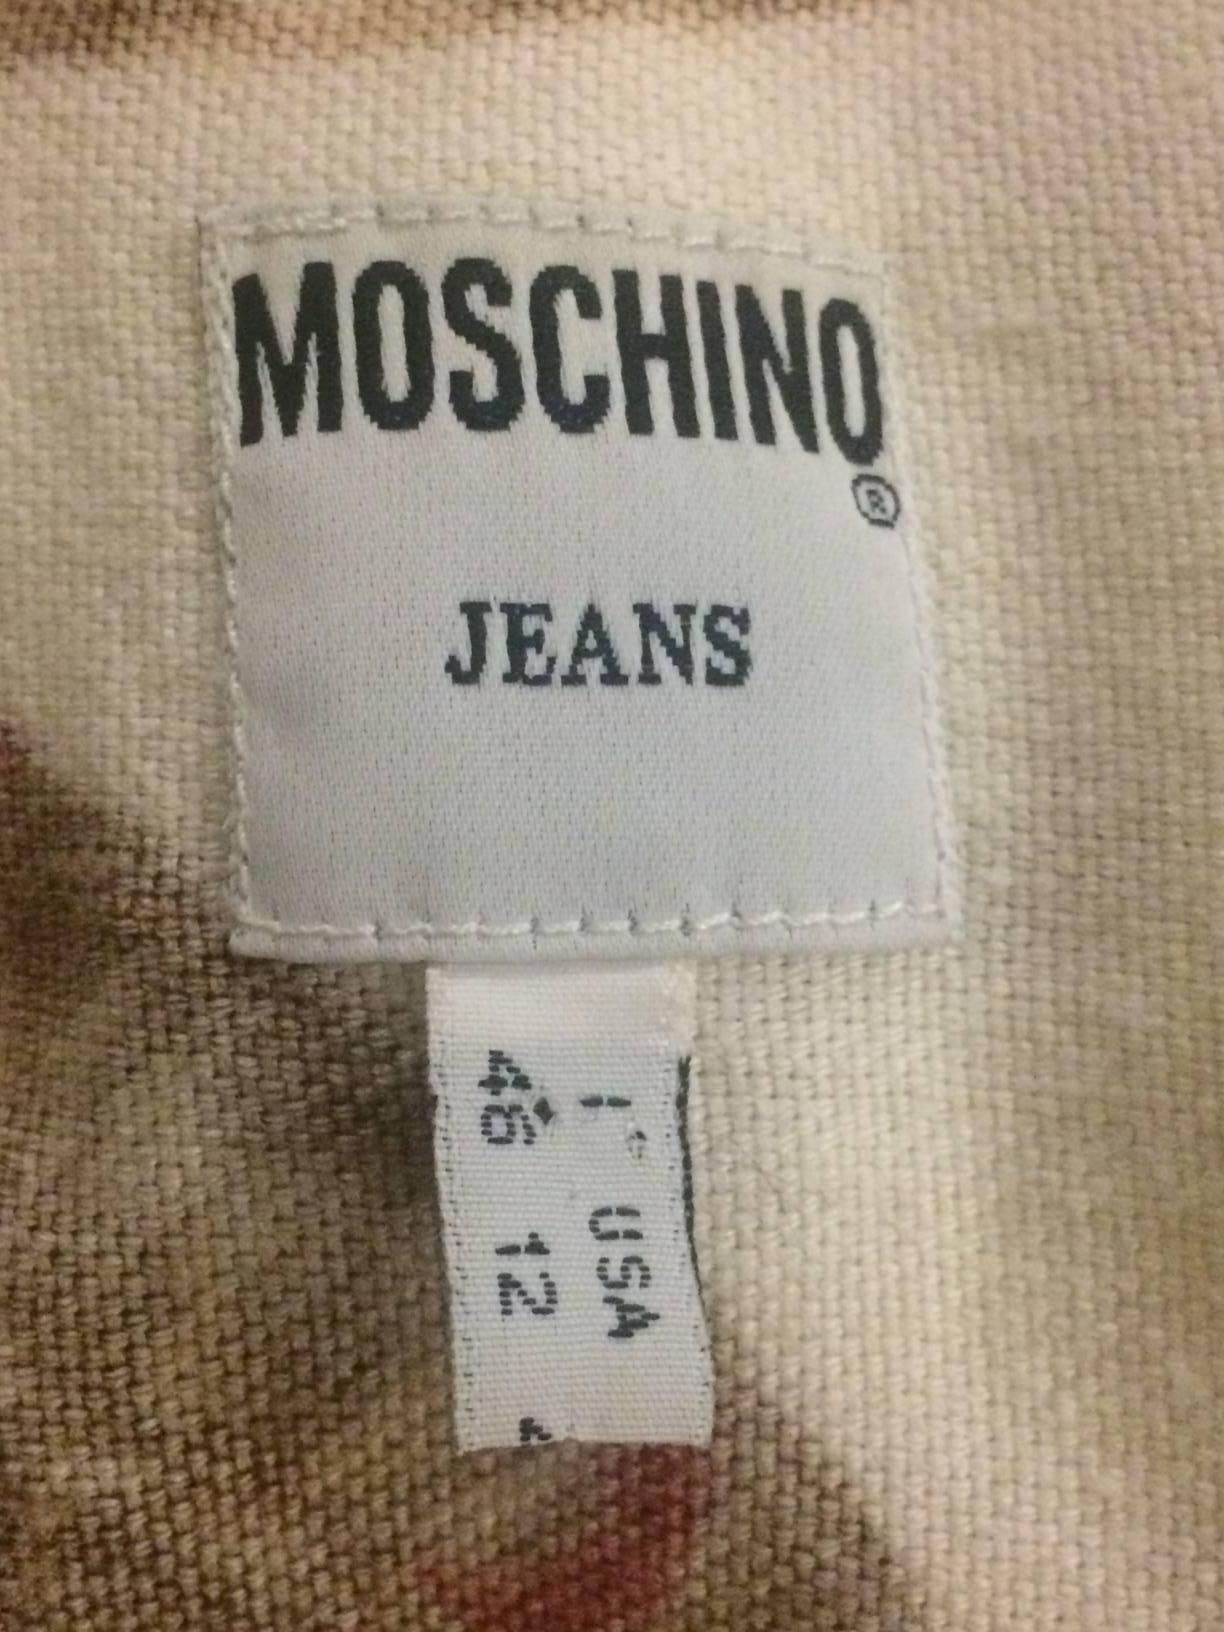 Beige Moschino Jeans Linen Blend Pizza Chianti and Italy Shift Dress, 1980s 